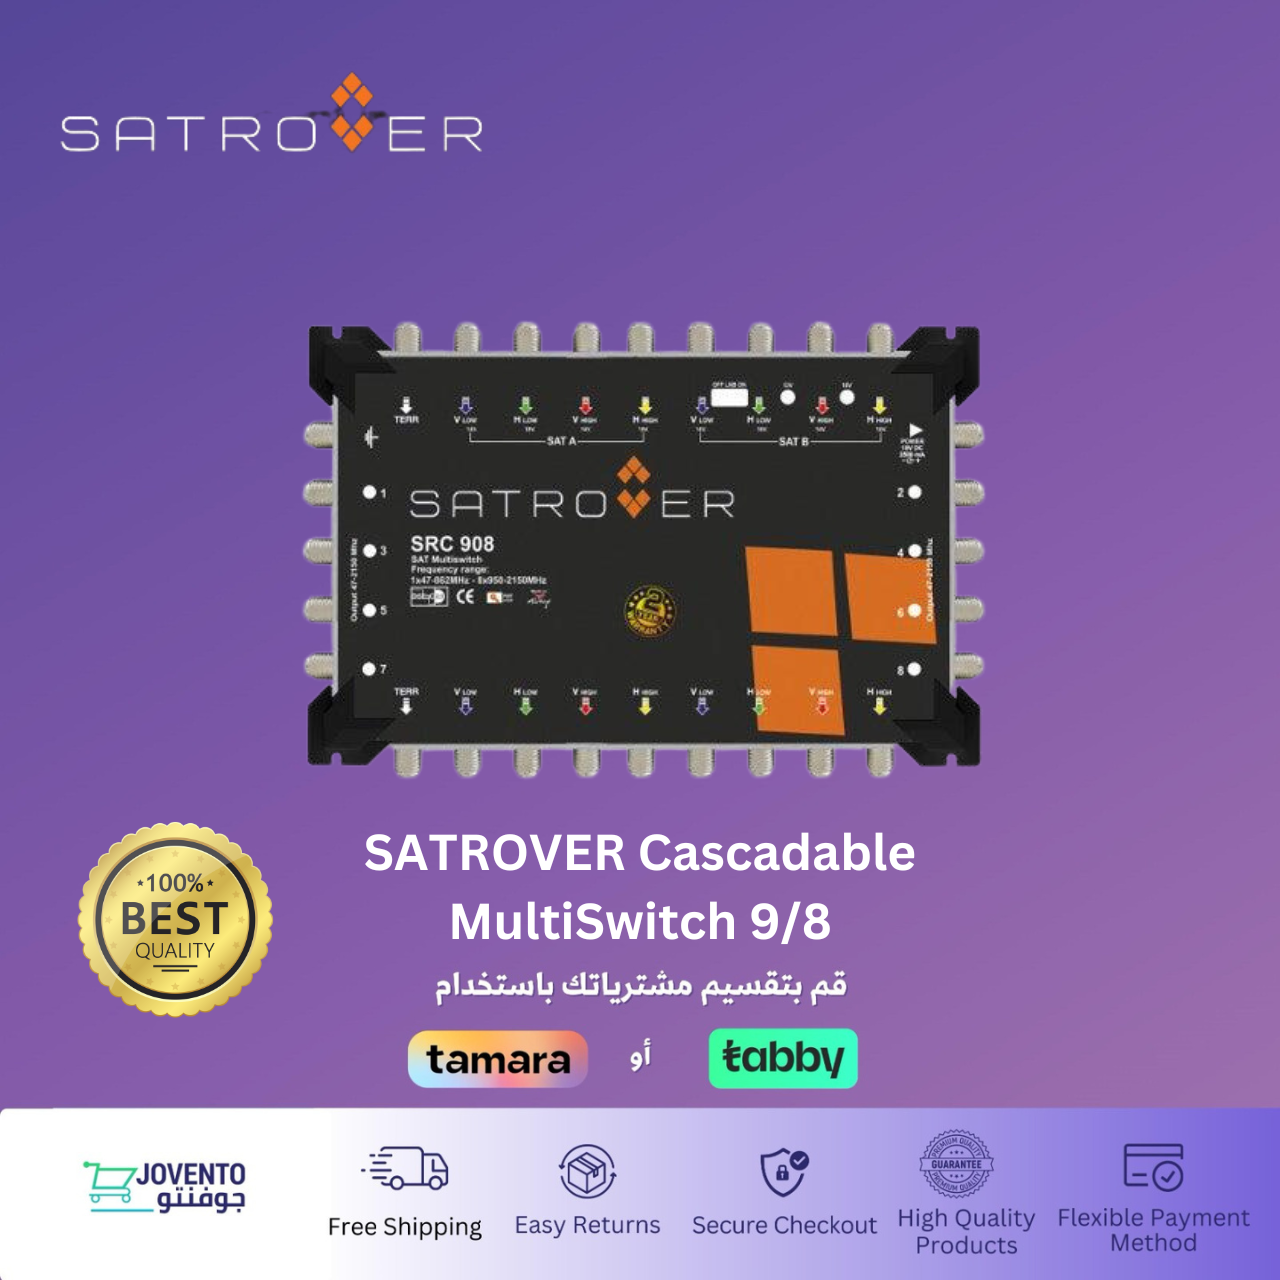 SATROVER Cascadable MultiSwitch 9/8